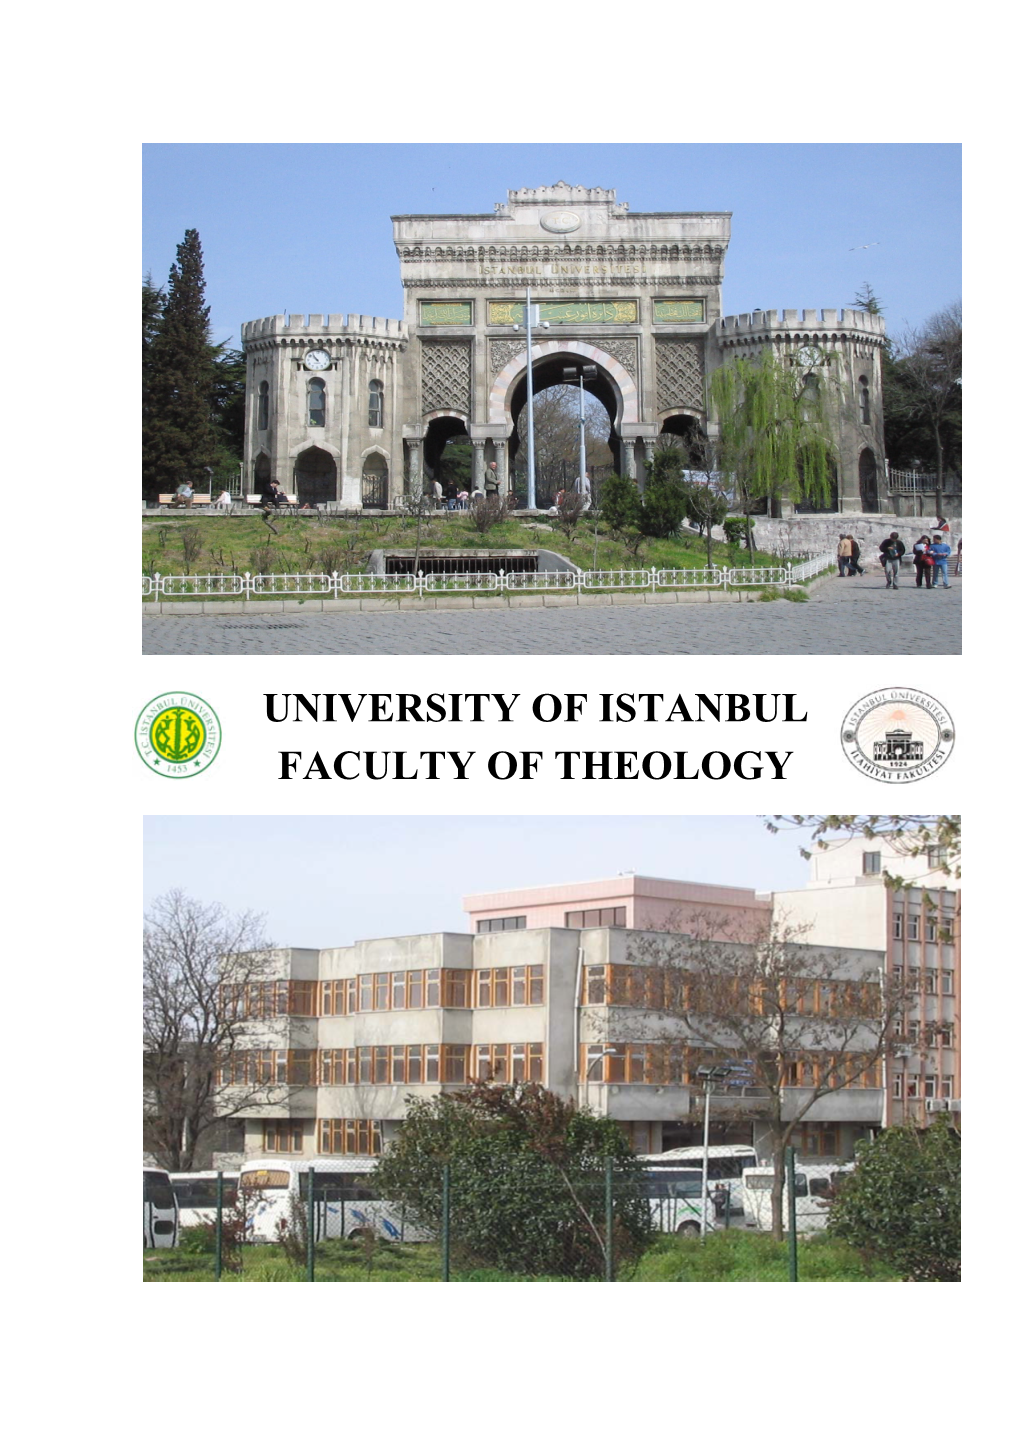 University of Istanbul Faculty of Theology